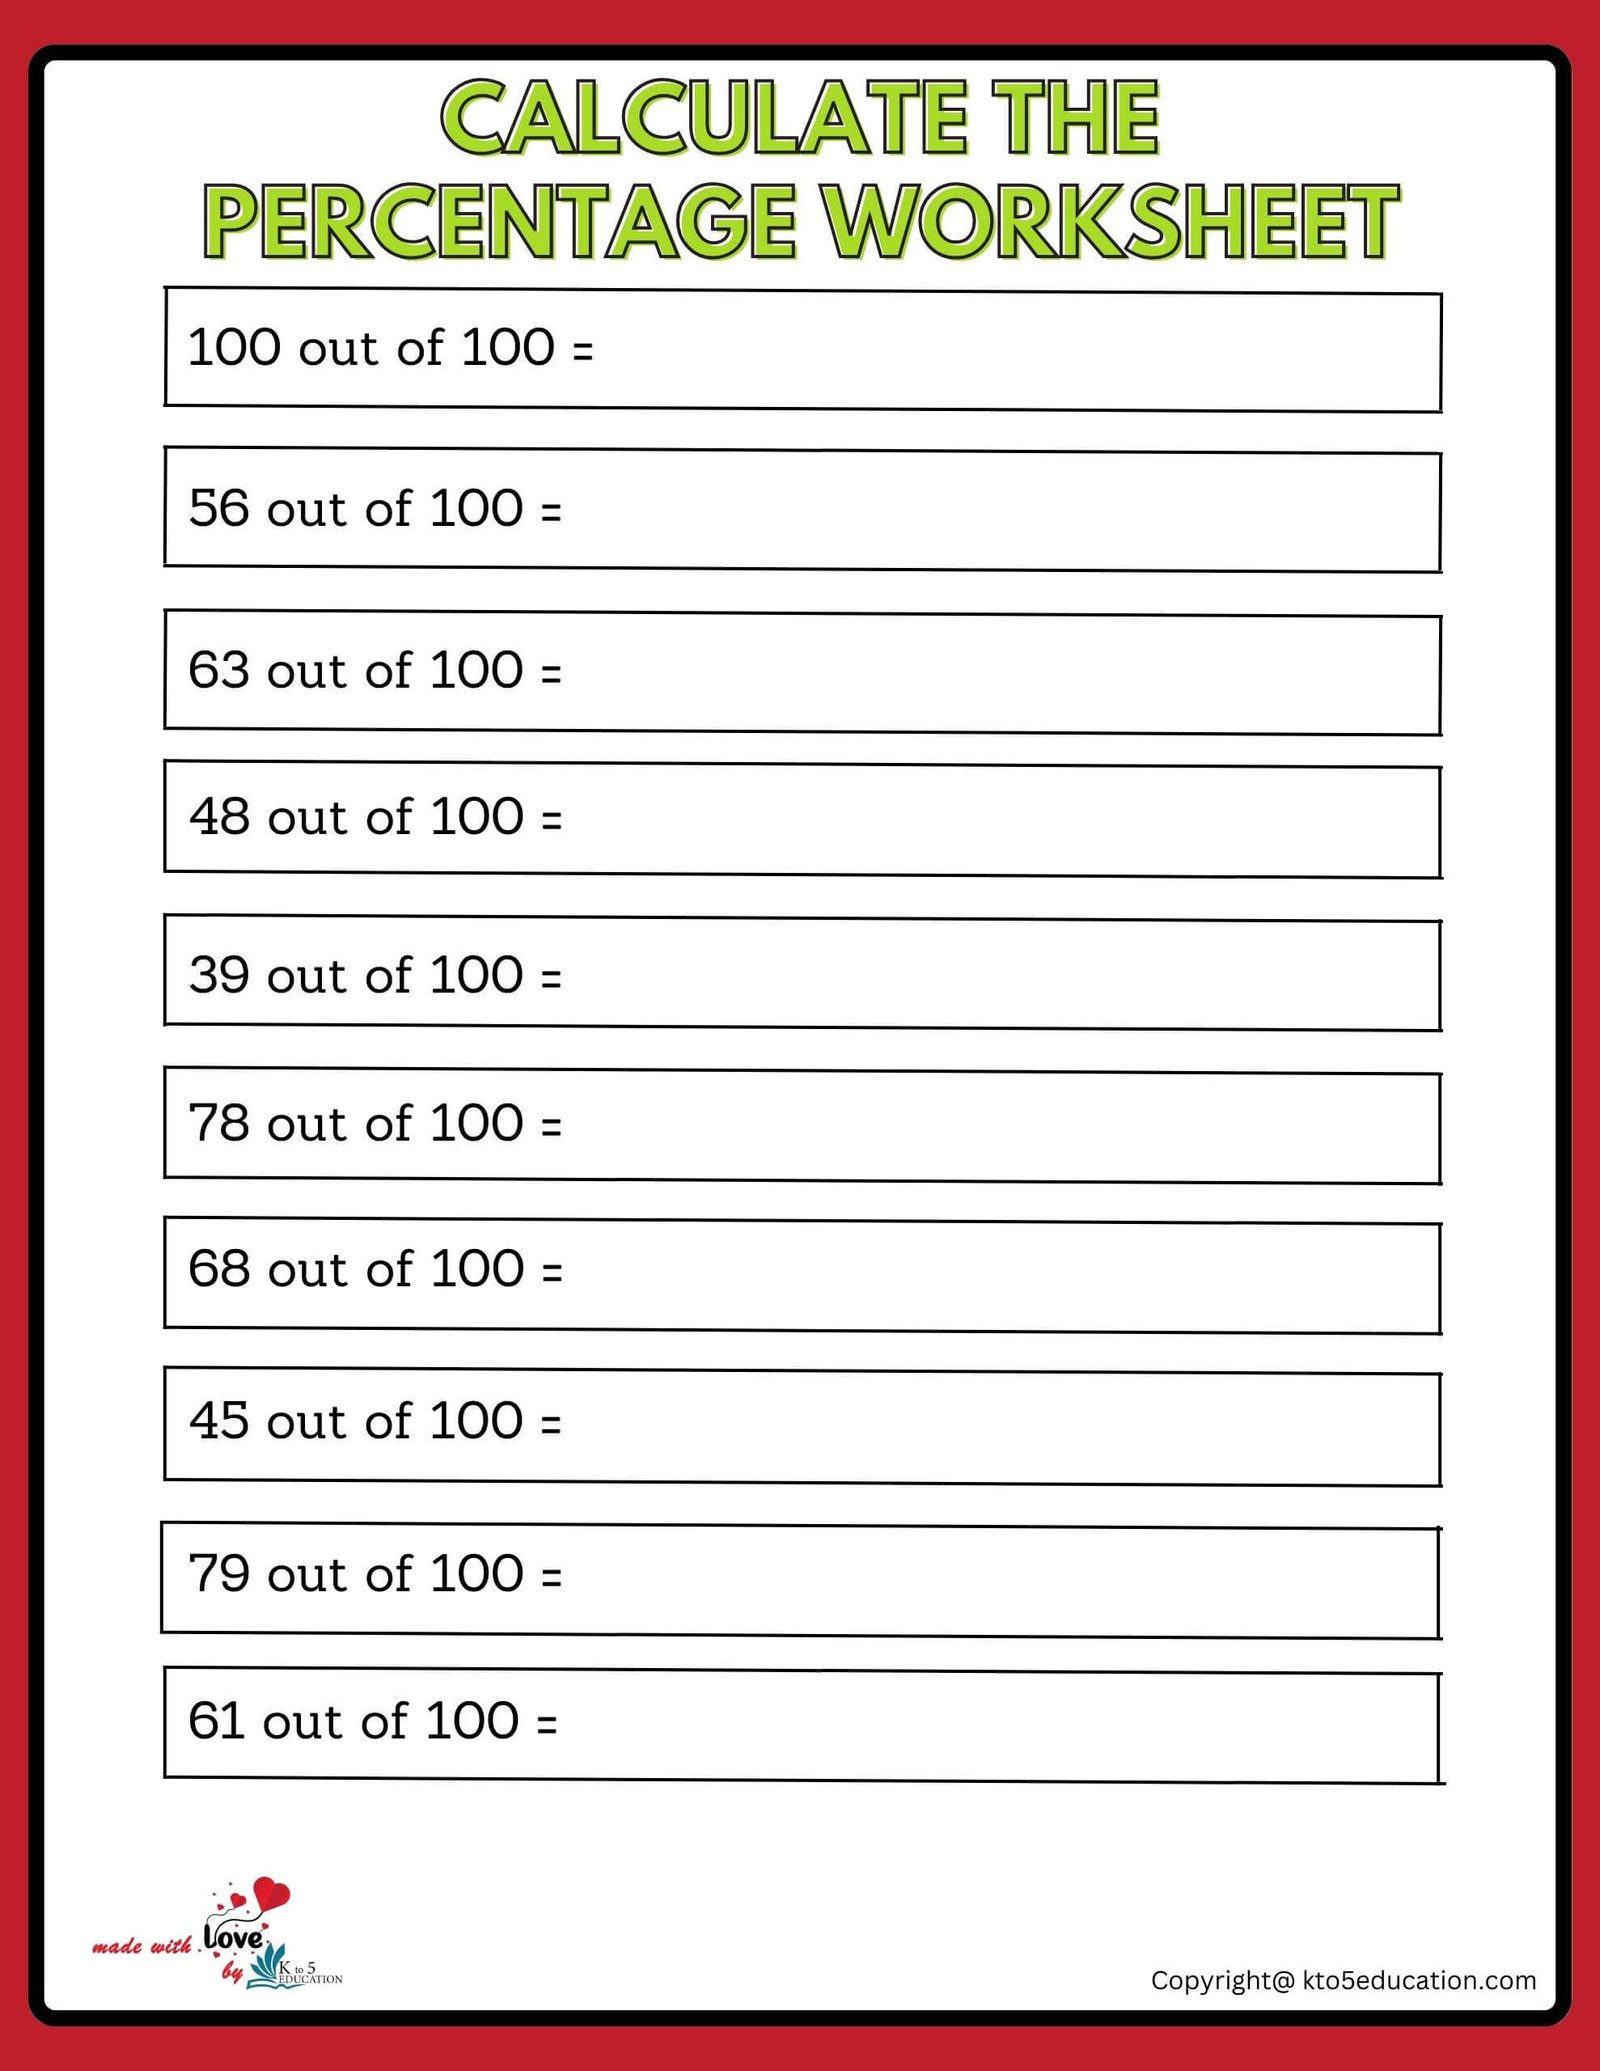 Calculate A Percentage Of 100 Worksheet